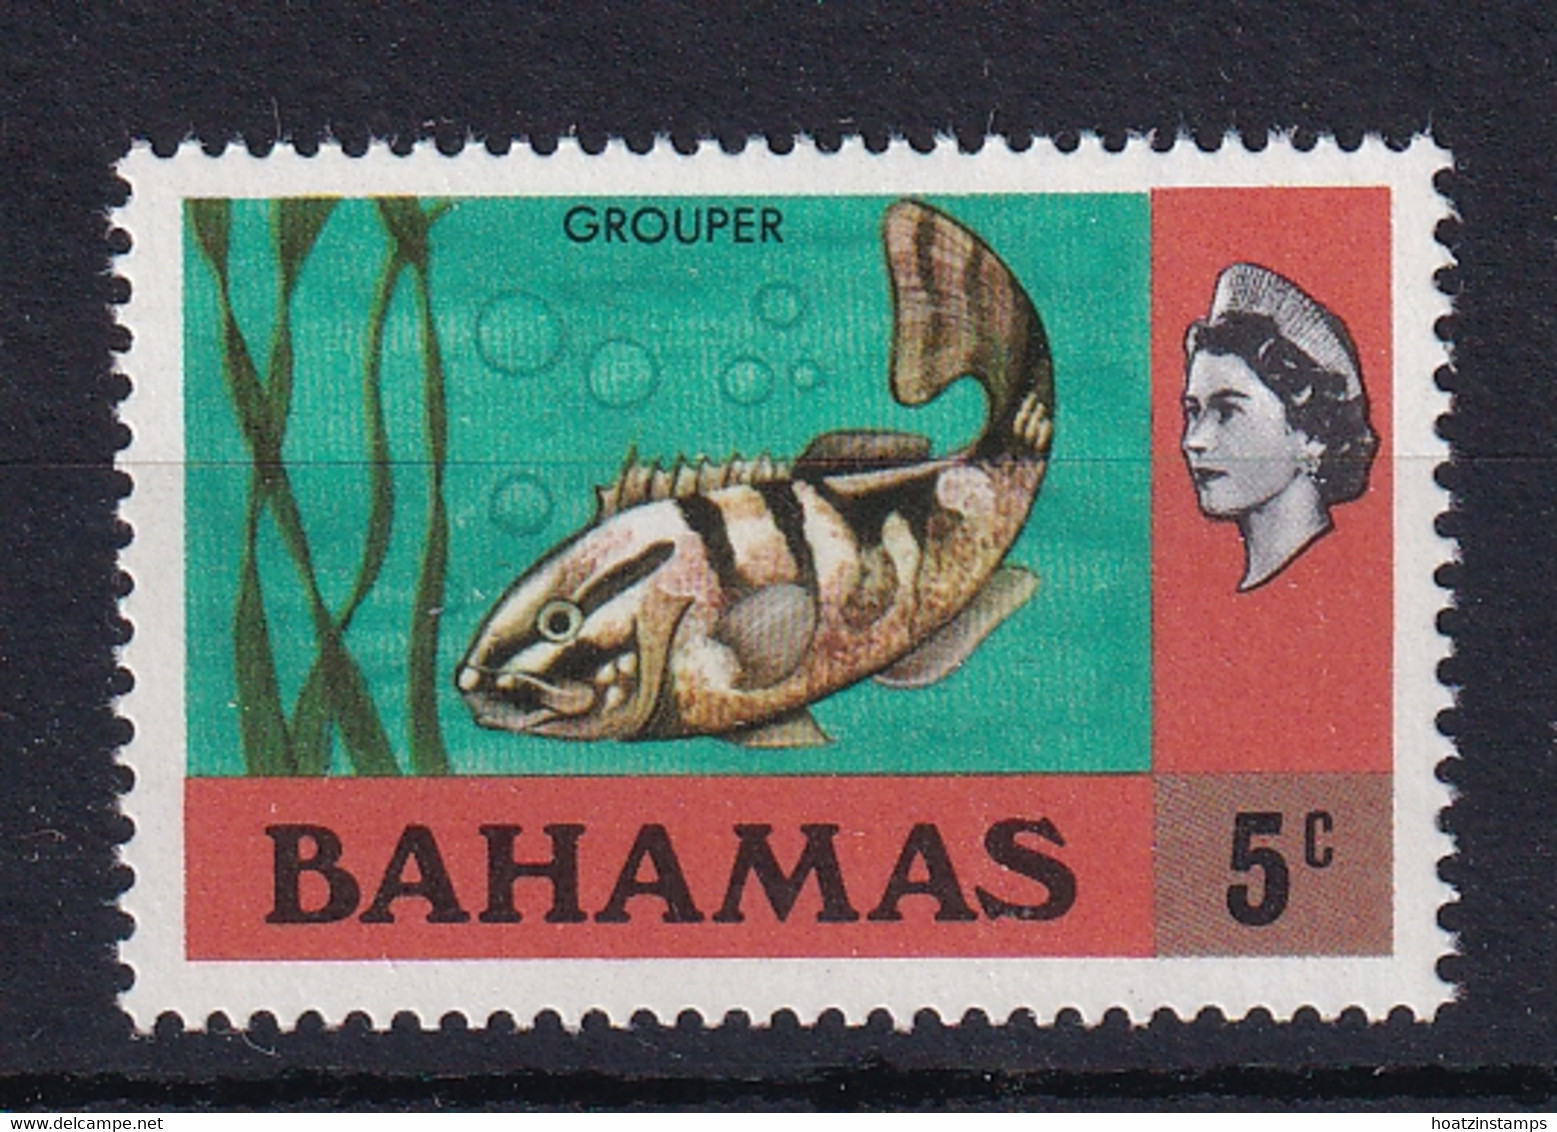 Bahamas: 1972/73   Pictorial   SG395    5c   [Wmk Sideways]  MNH - 1963-1973 Ministerial Government